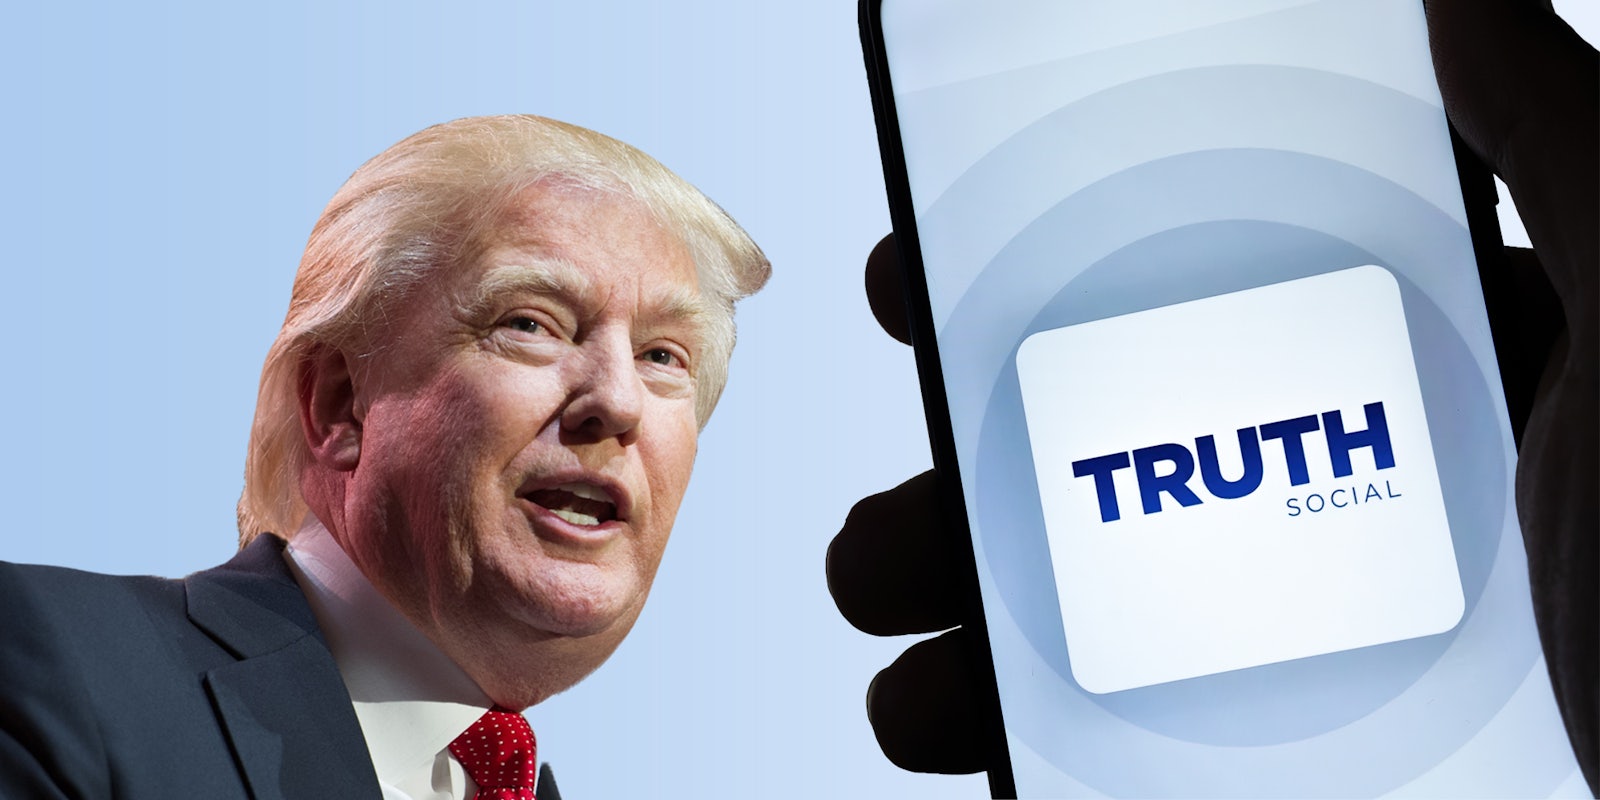 Donald Trump on left on light blue background with silhouette of hand holding phone with TRUTH social app on screen on right